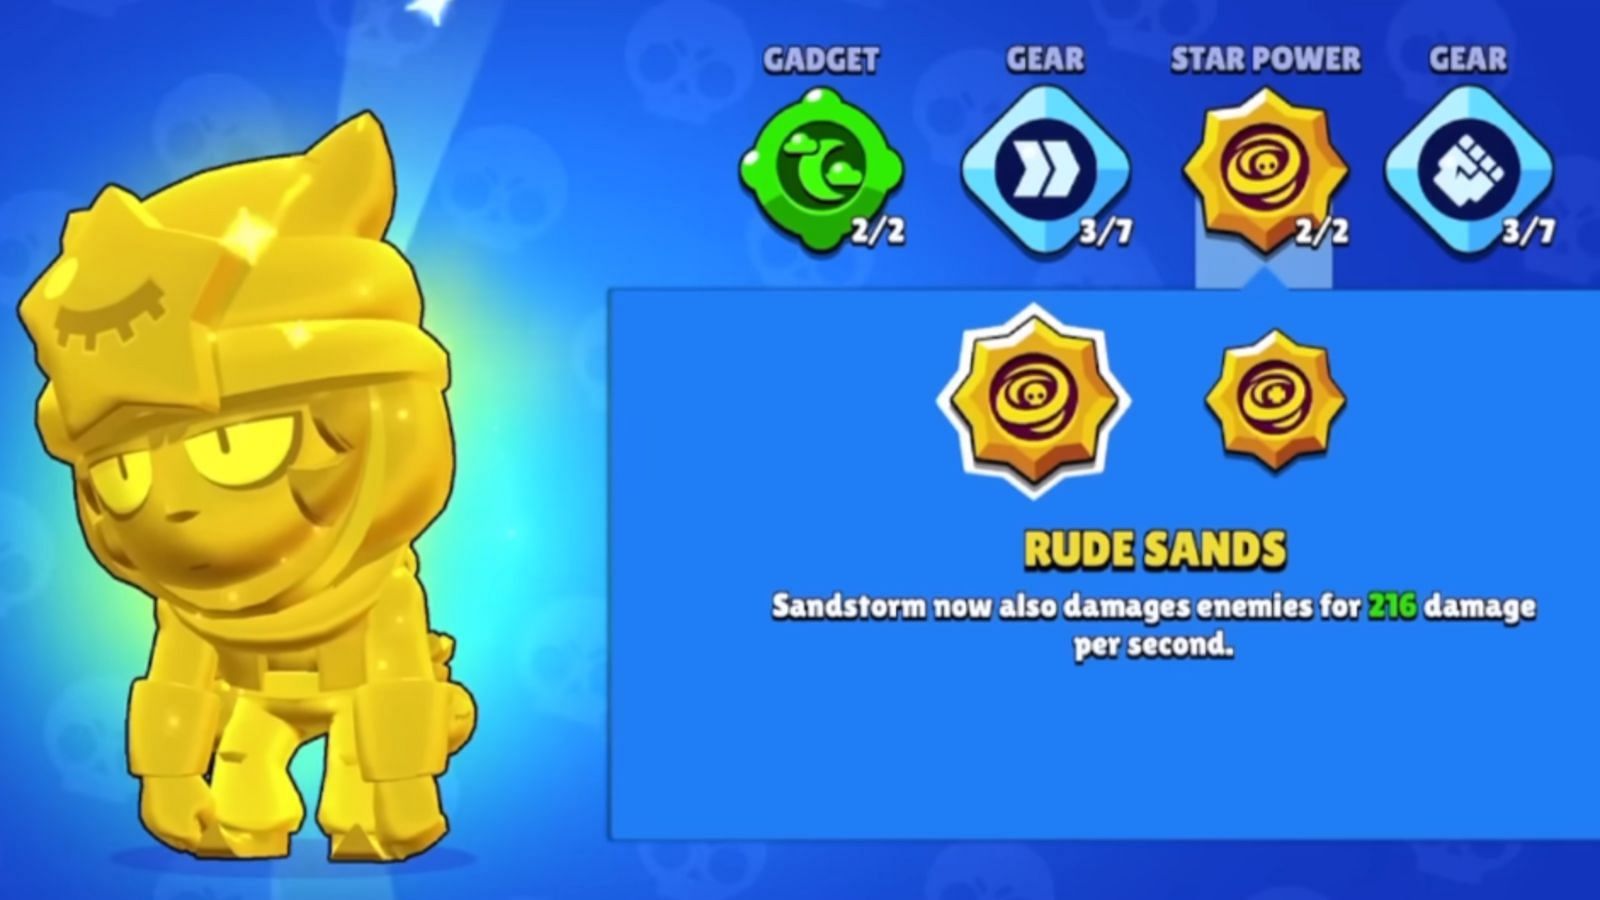 Rude Sands Star Power (Image via Supercell)